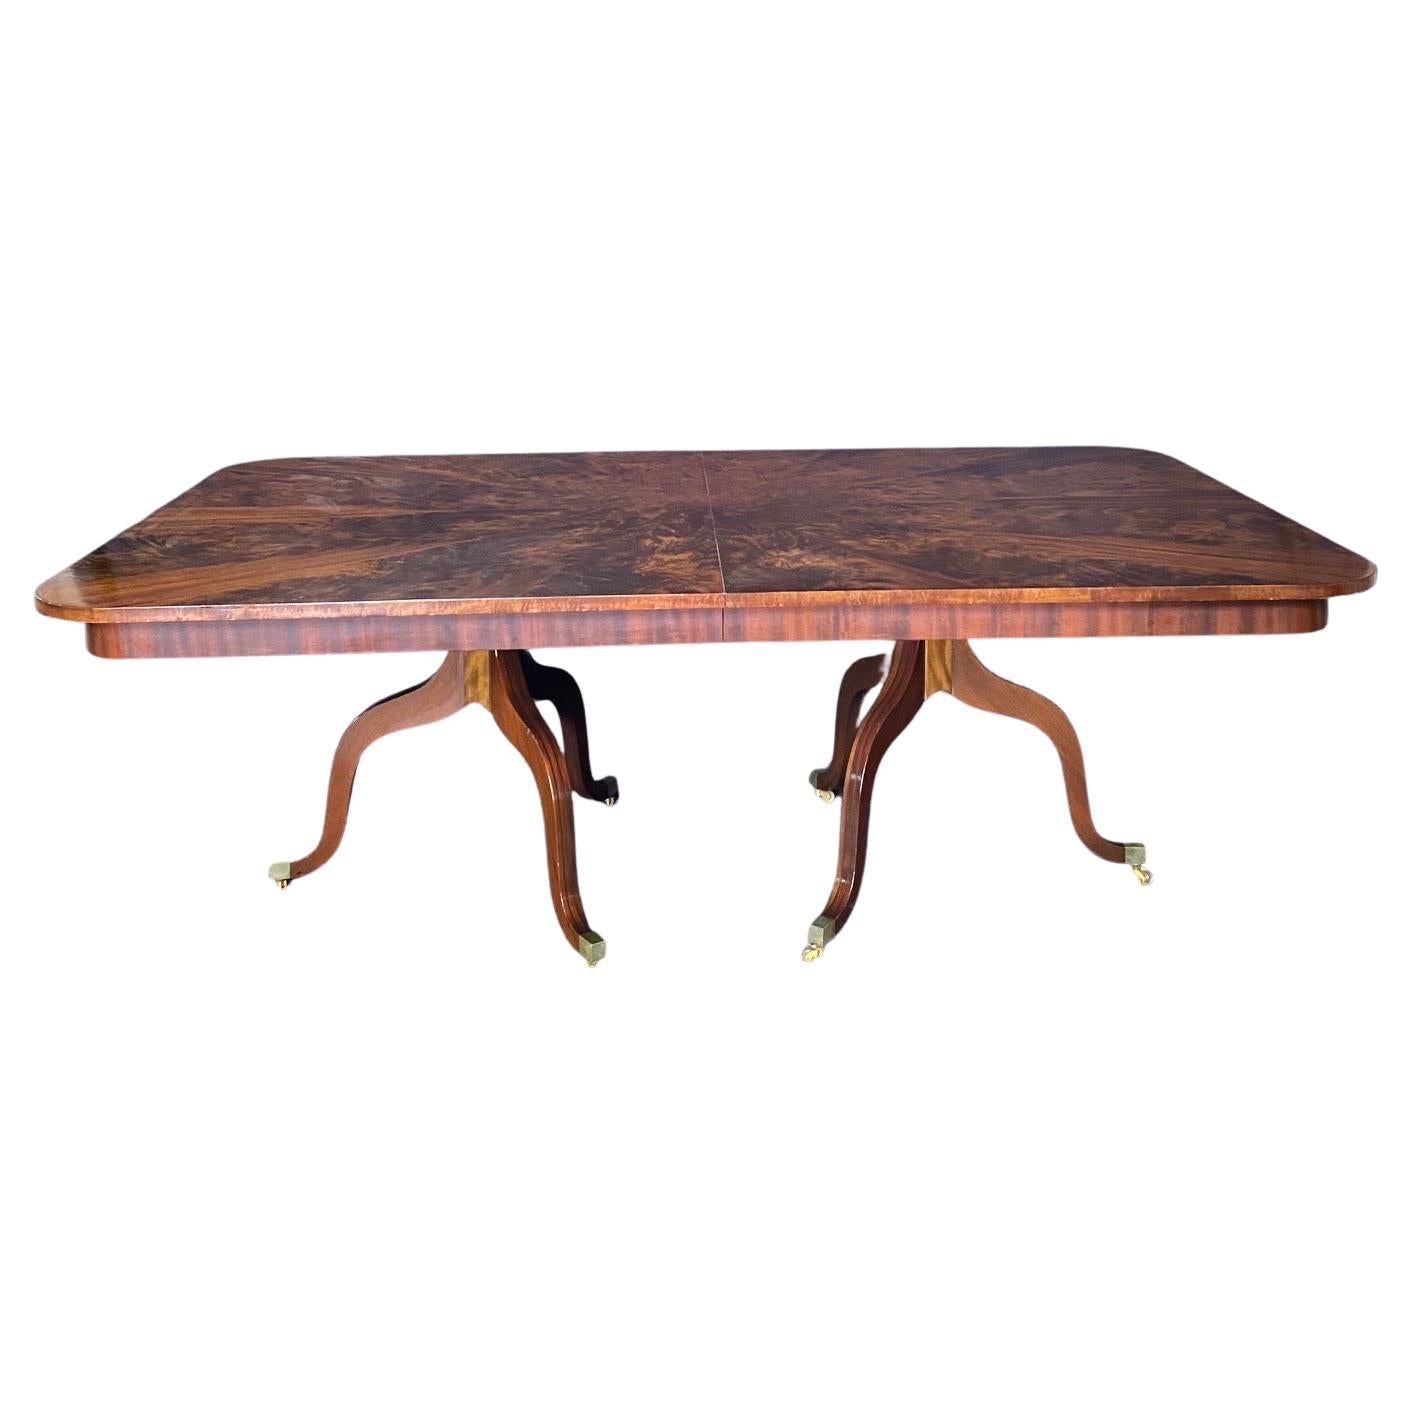  Flame Mahogany Regency Double Pedestal Dining Table with Two Leaves 